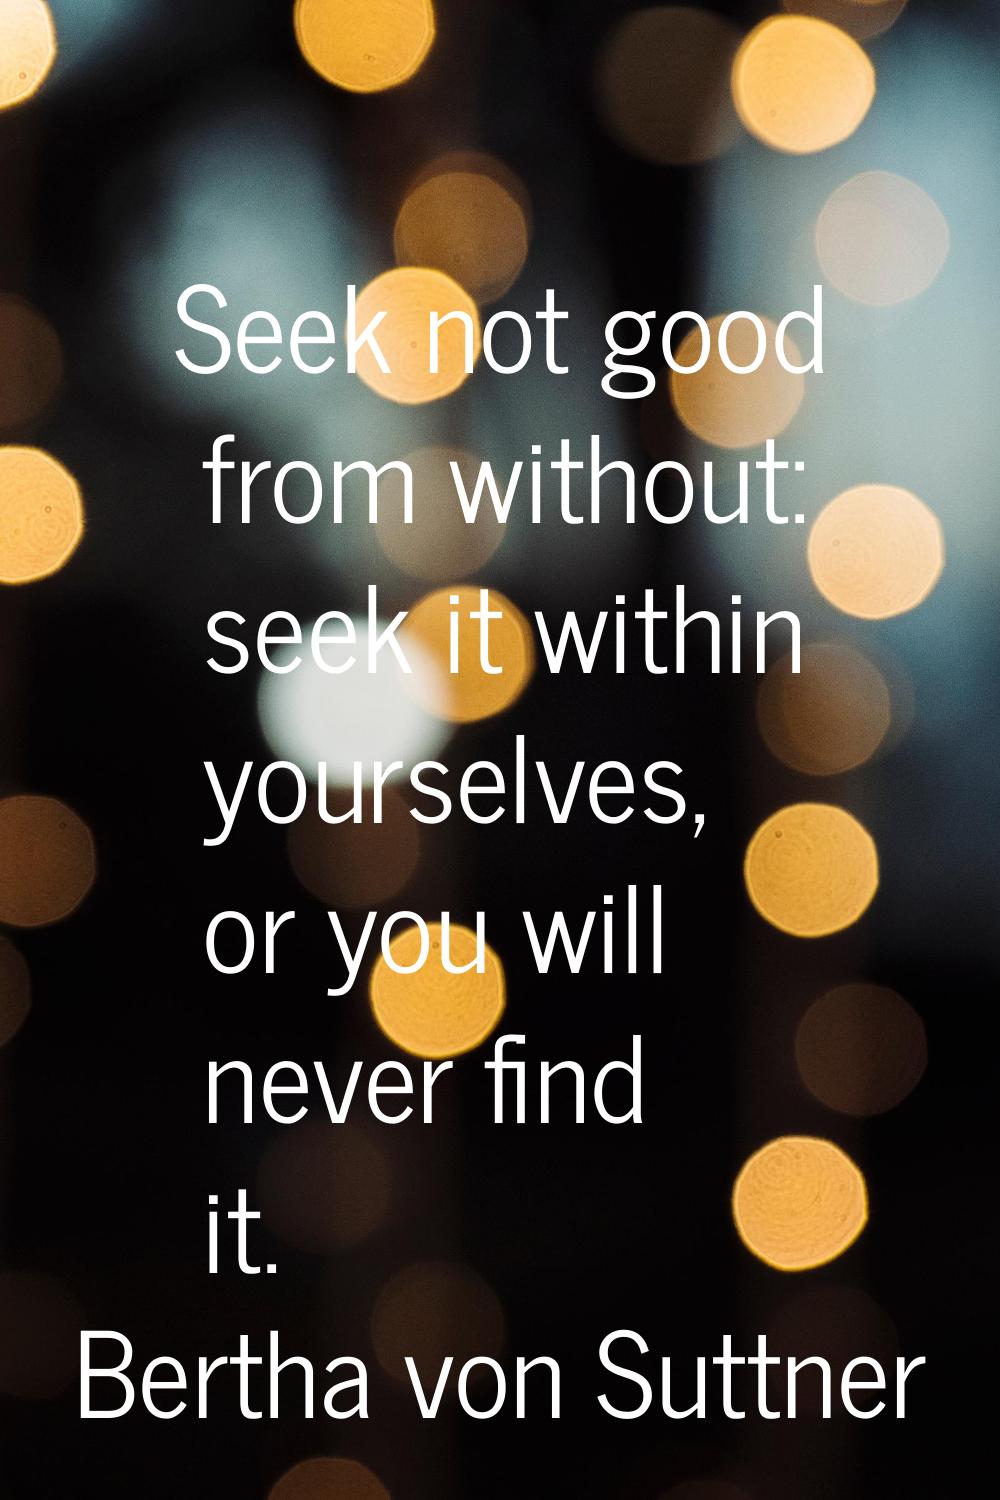 Seek not good from without: seek it within yourselves, or you will never find it.